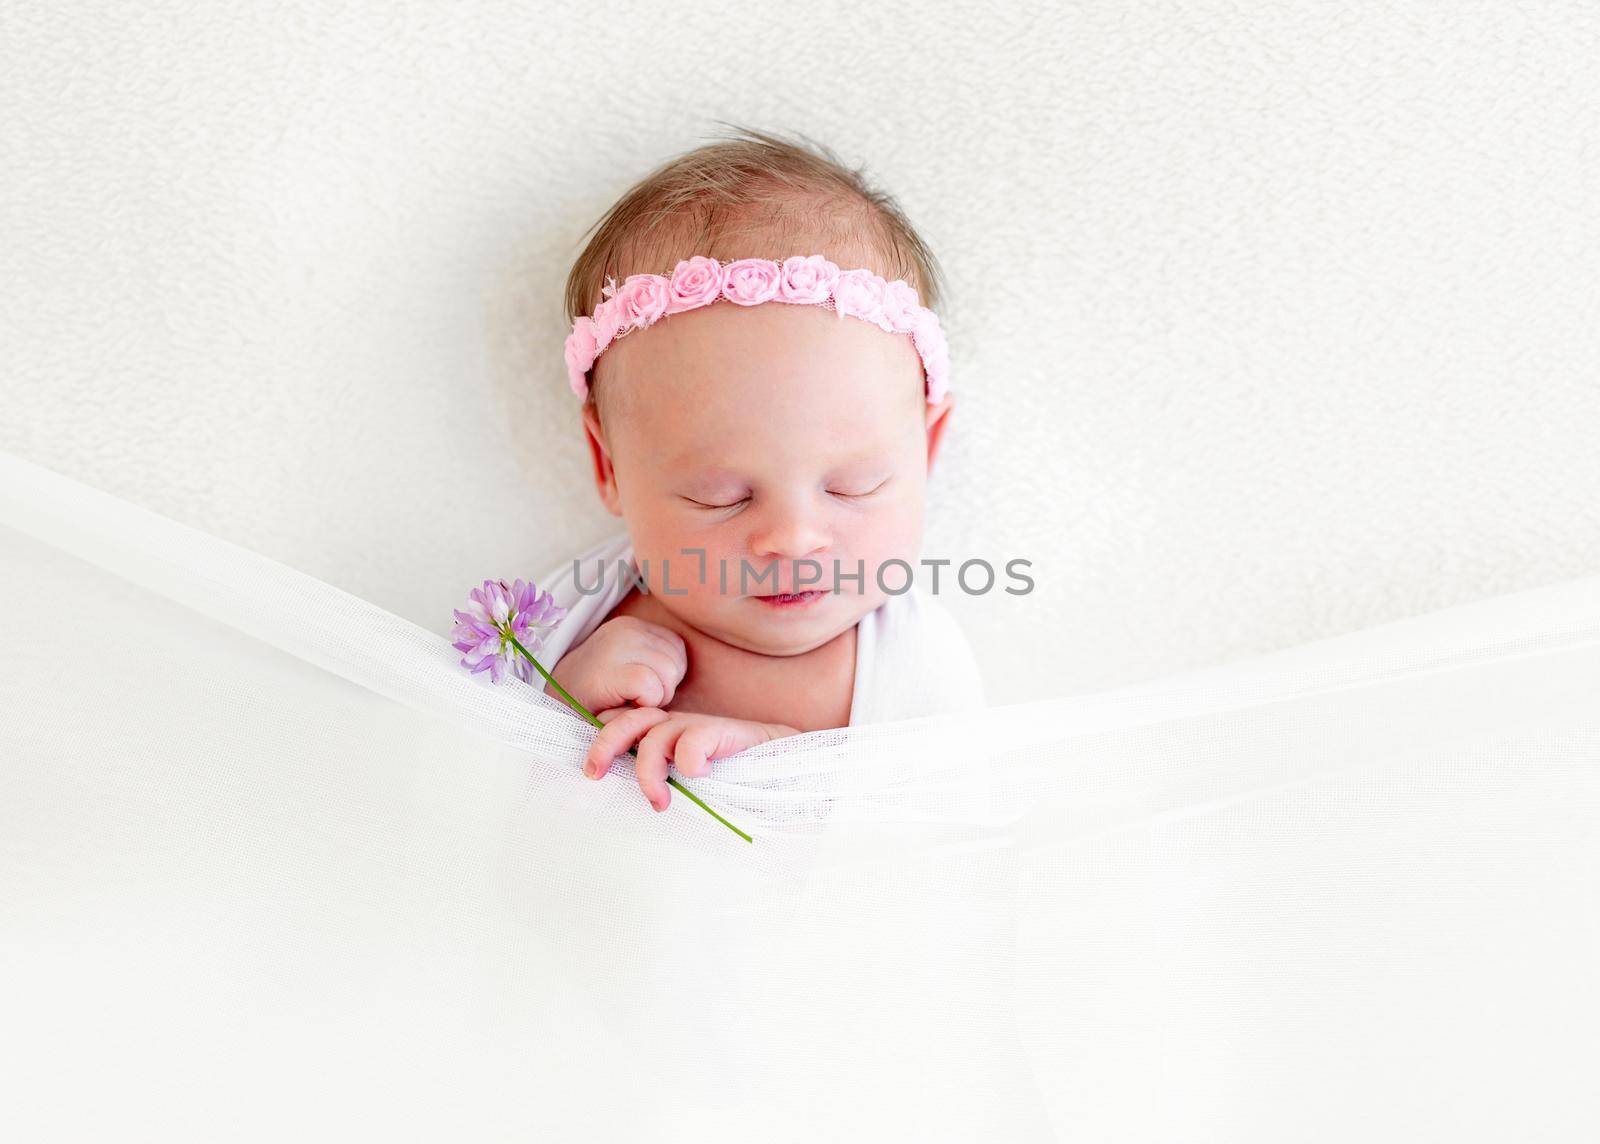 Sleeping newborn baby girl with flowers wrapped in white blanket